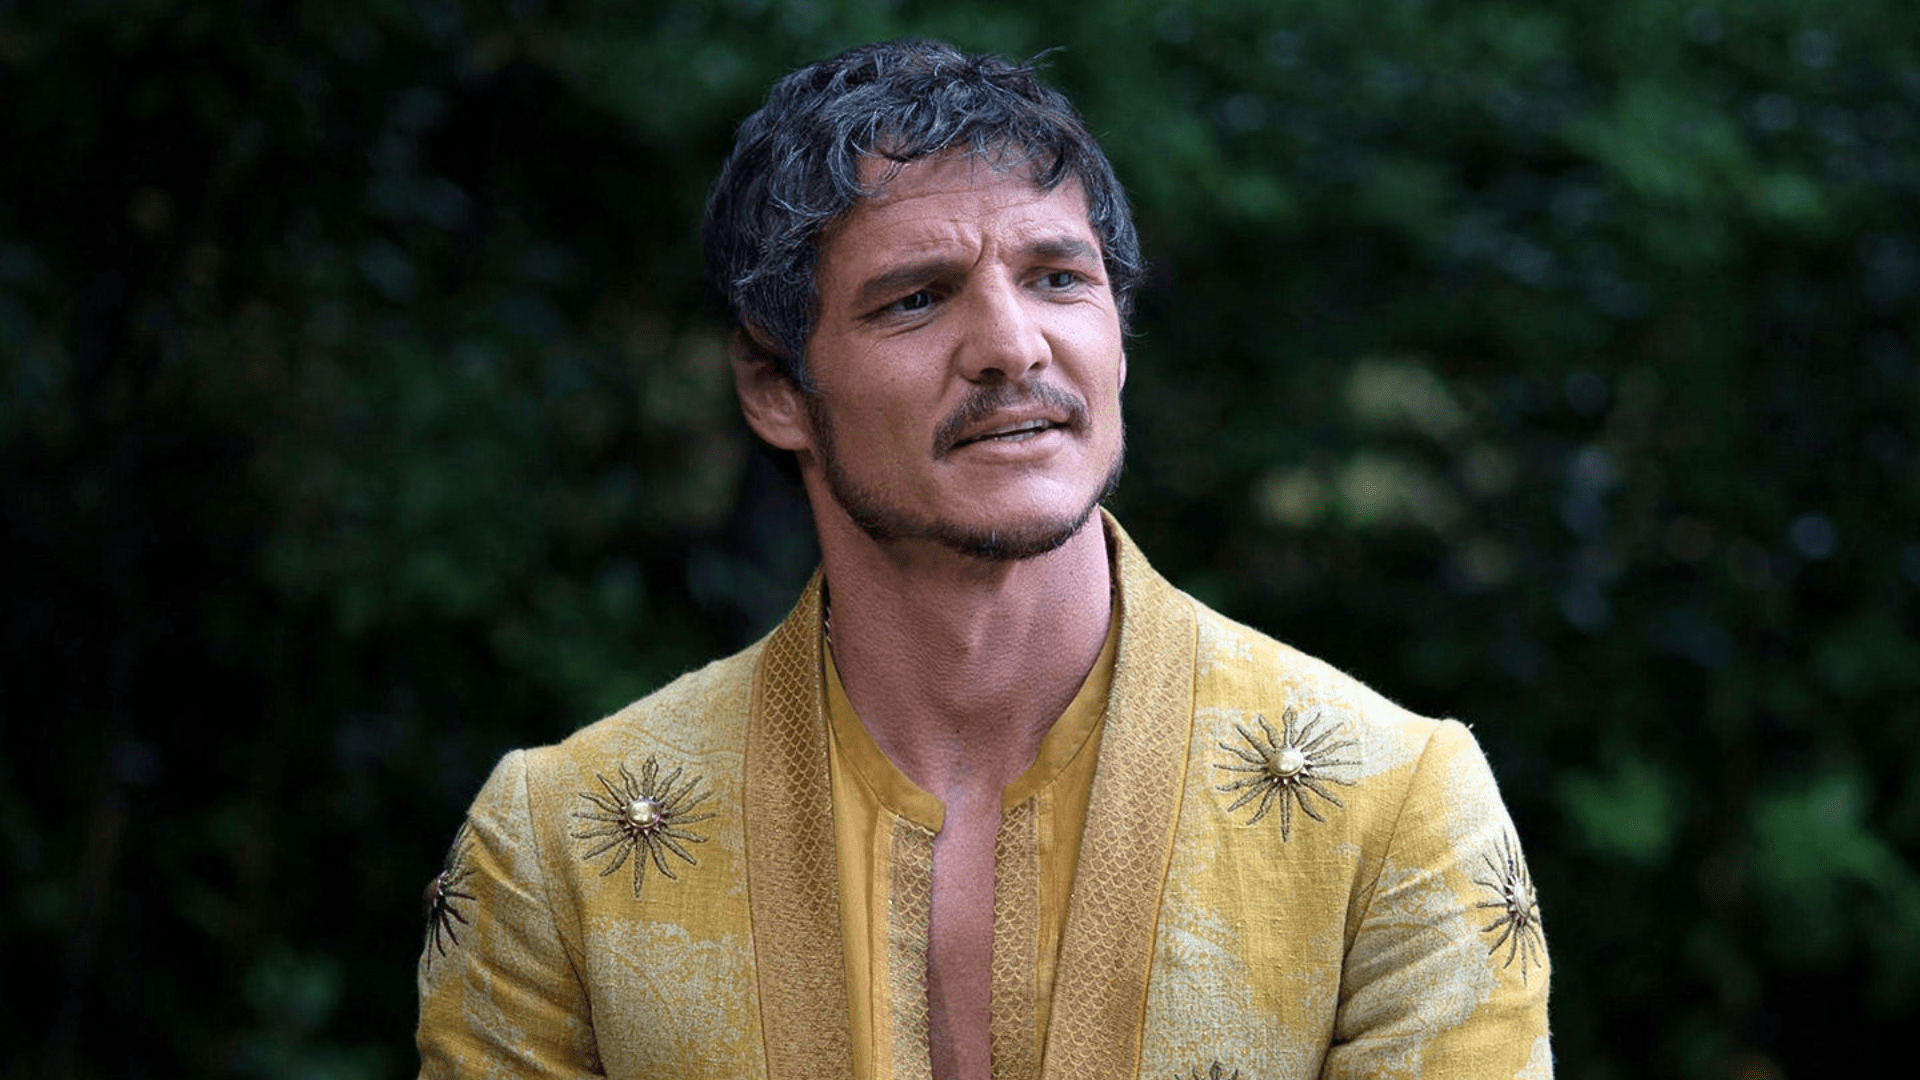 Pedro Pascal’s Other Roles - He’s The Perfect Joel Miller, But Where Else Have We Seen Pedro Pascal?